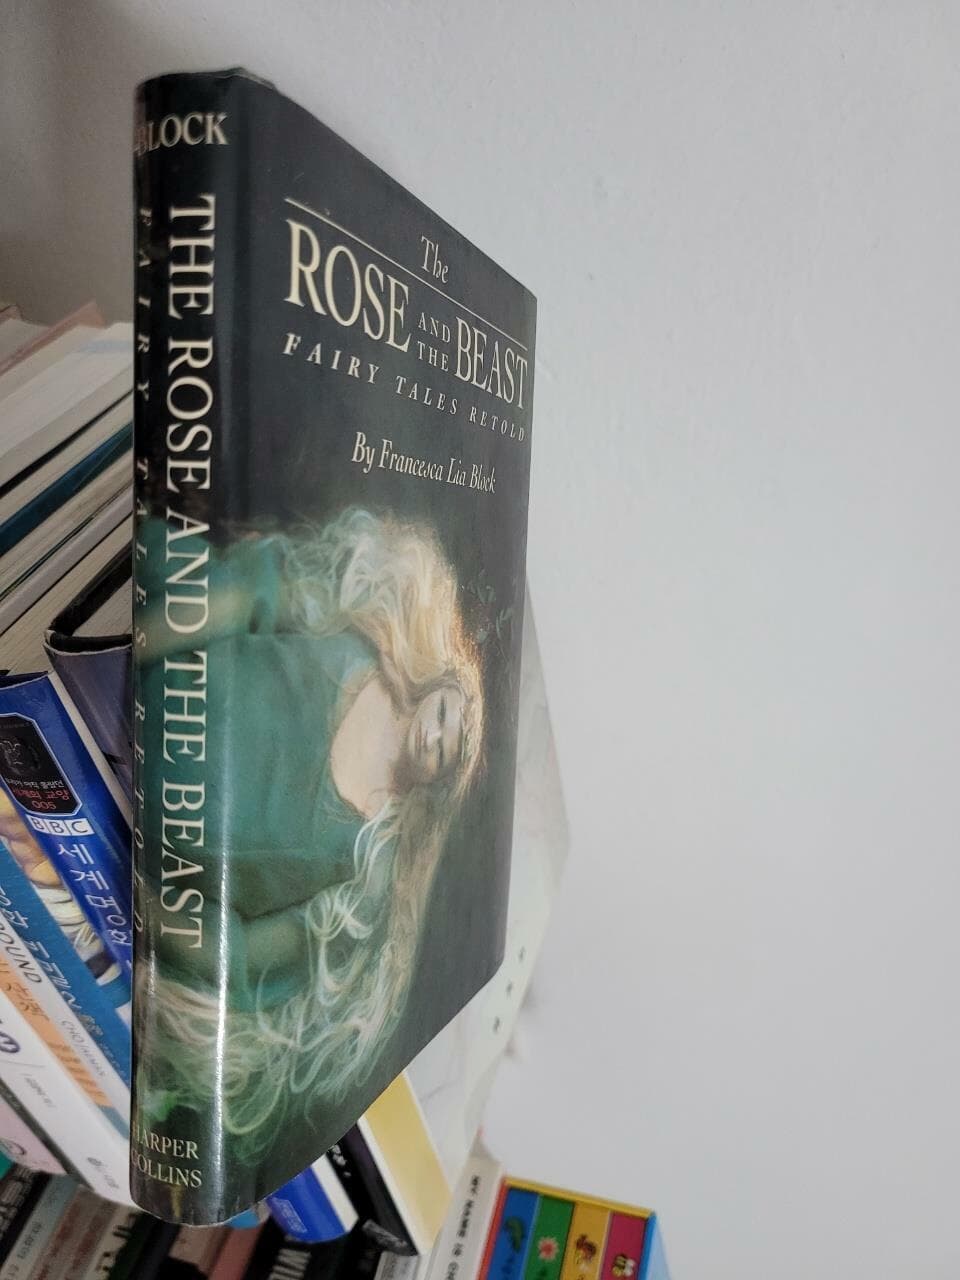 The Rose and The Beast: Fairy Tales Retold (Hardcover, First Edition) 